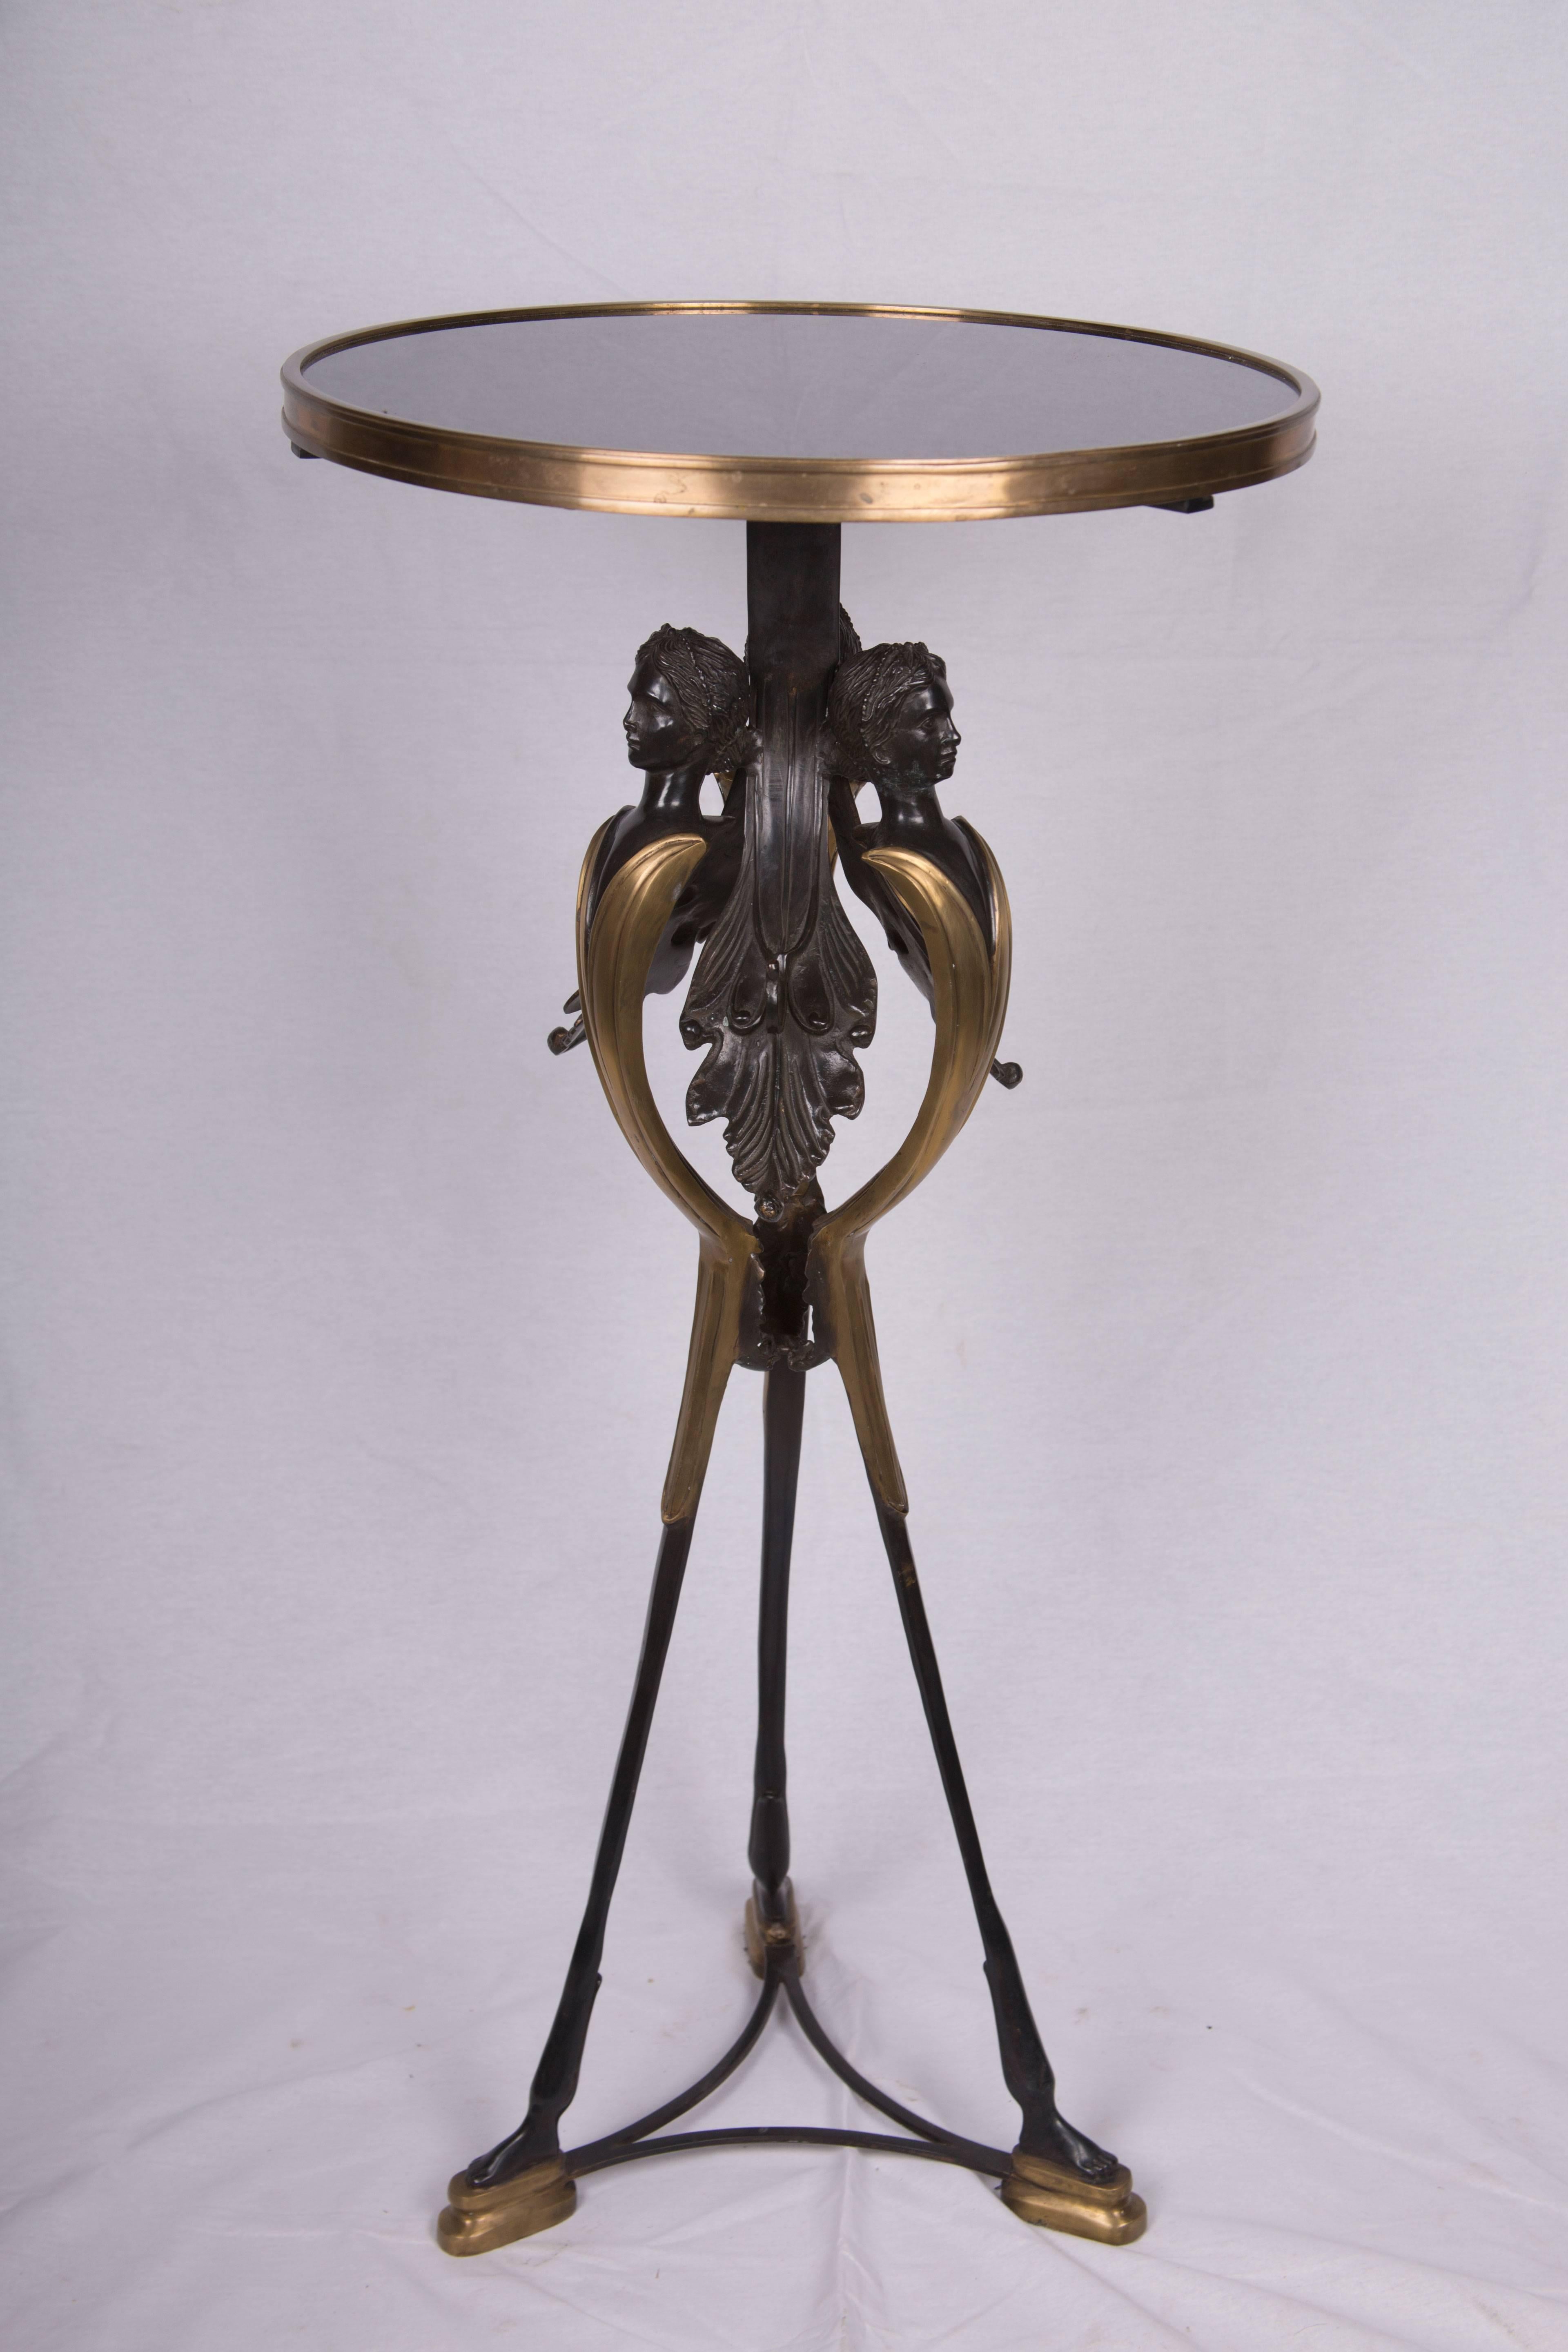 20th Century Bronzed and Burnished Metal Empire Style Pedestal with Marble Top